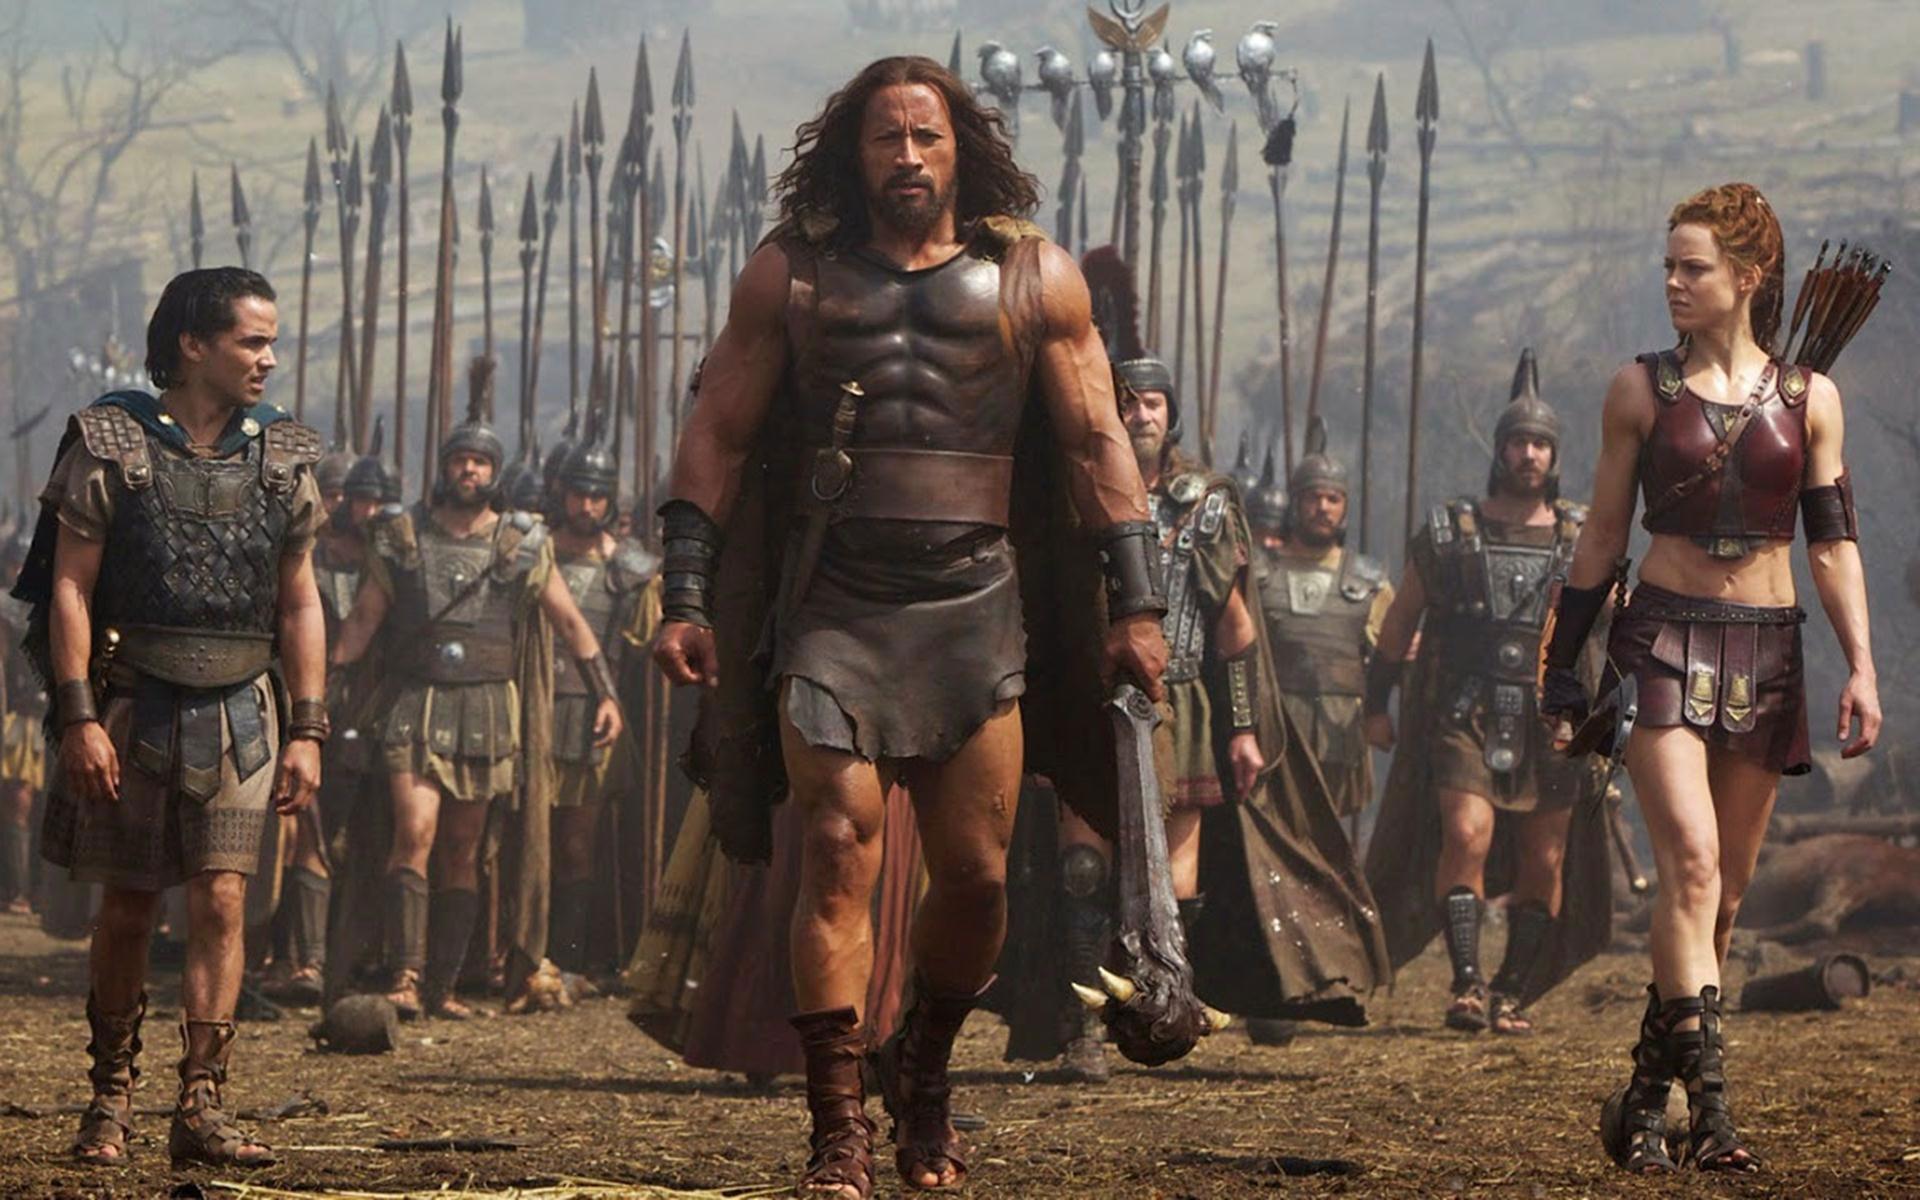 Hercules On His Way To The Battle HD 16 10